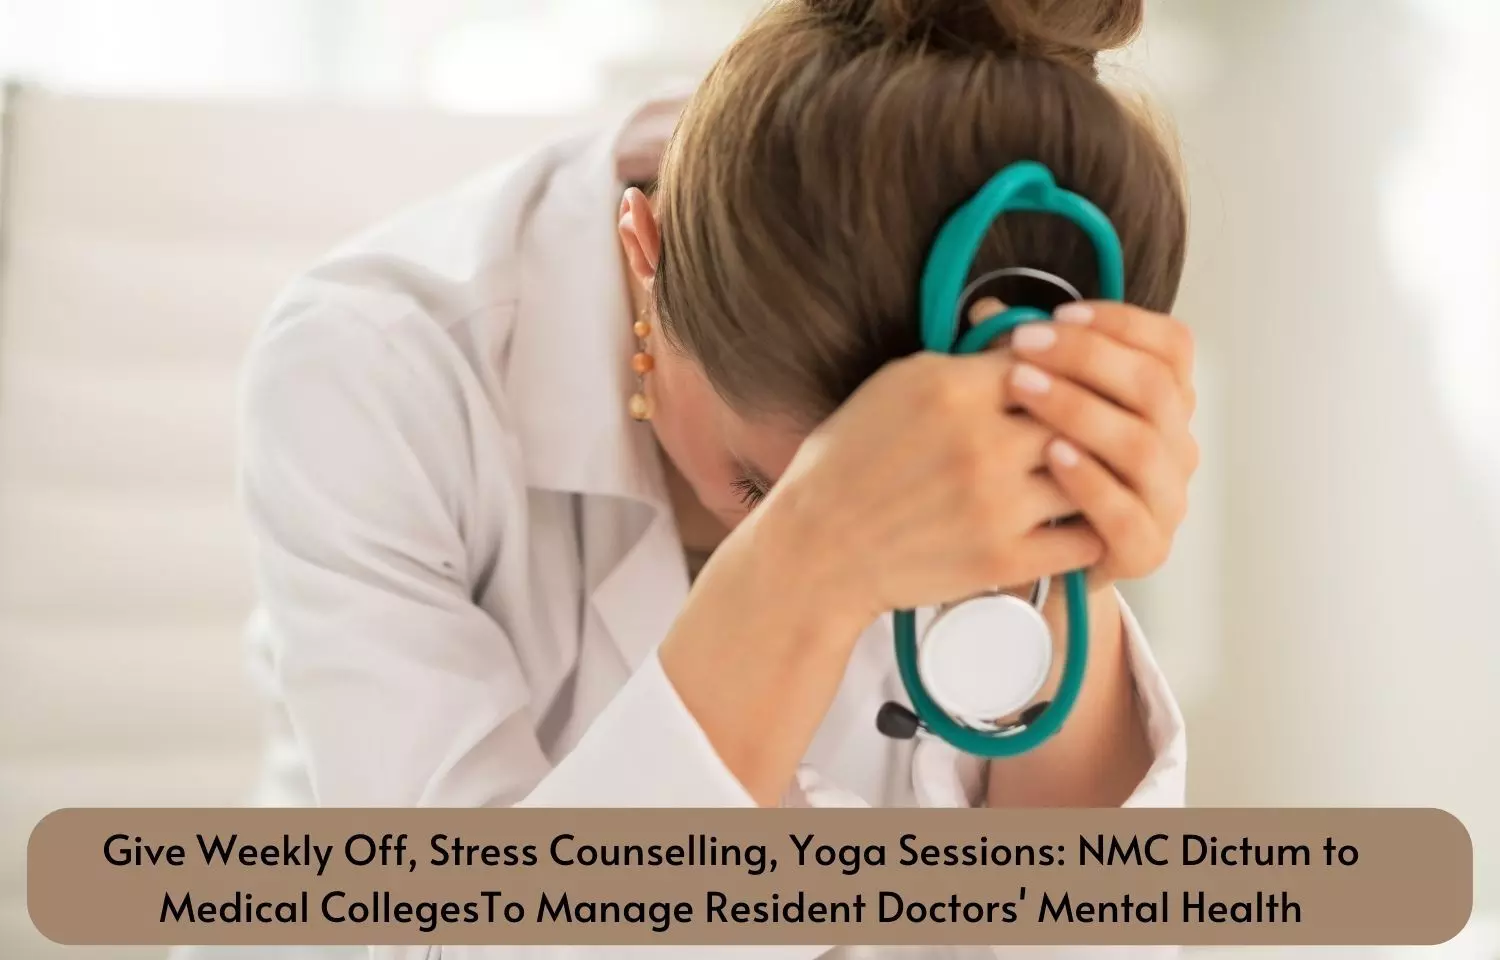 Give weekly off, stress counselling, yoga sessions: NMC dictum to medical colleges to manage resident doctors mental health